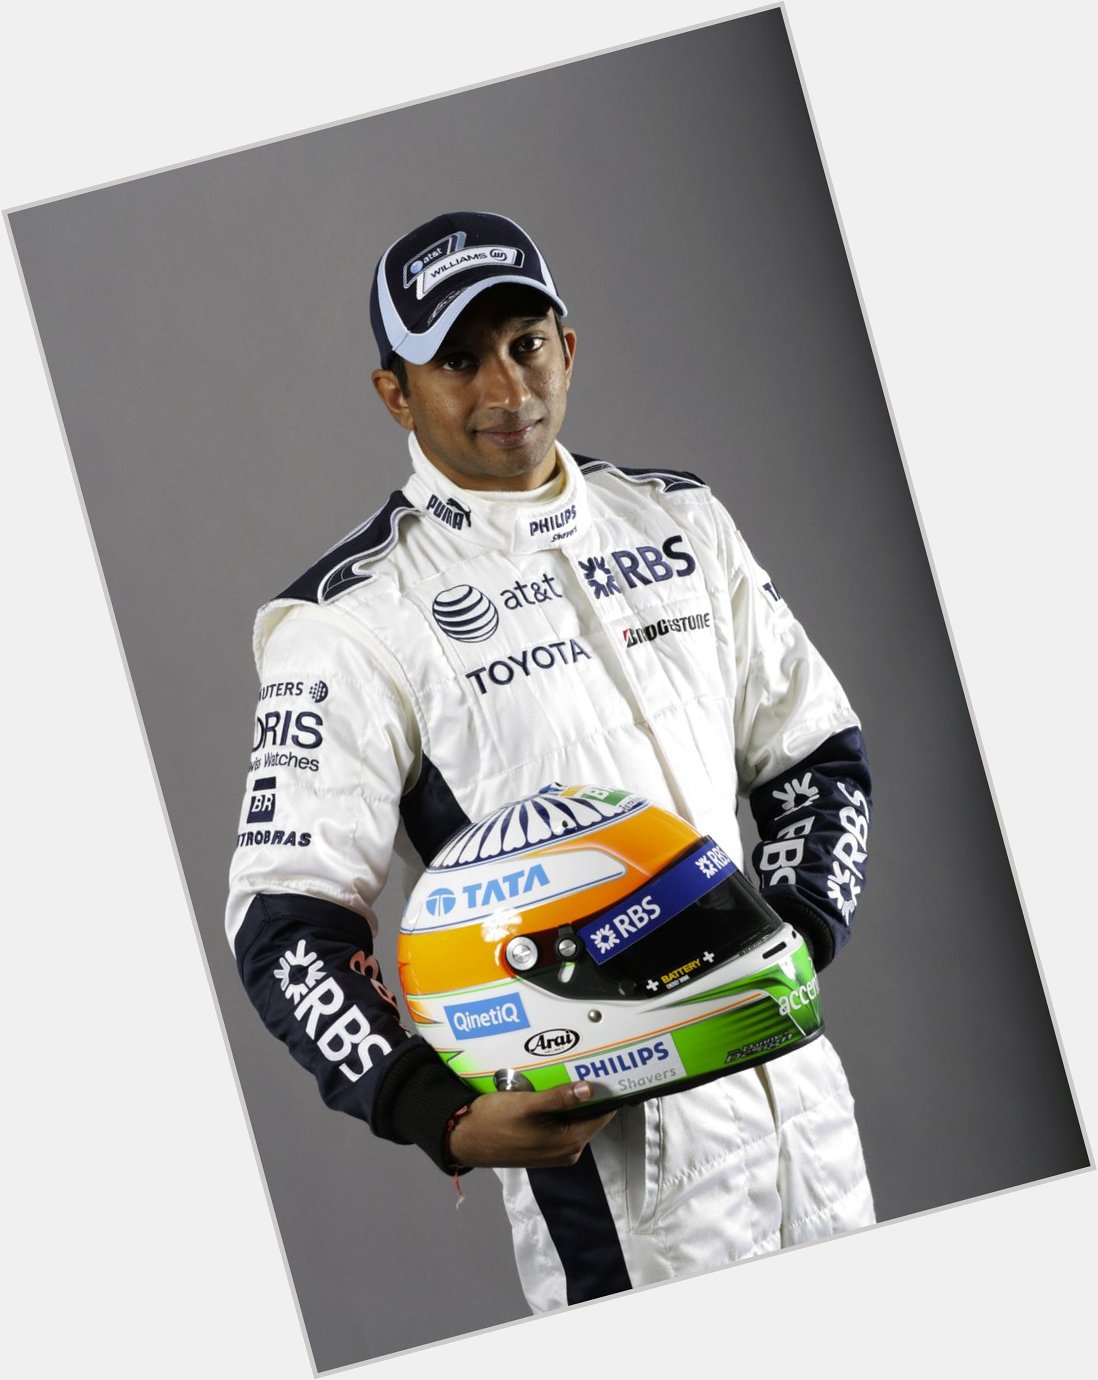 Team wishes the India\s first Formula One racer Narain Karthikeyan a very Happy Birthday!! 